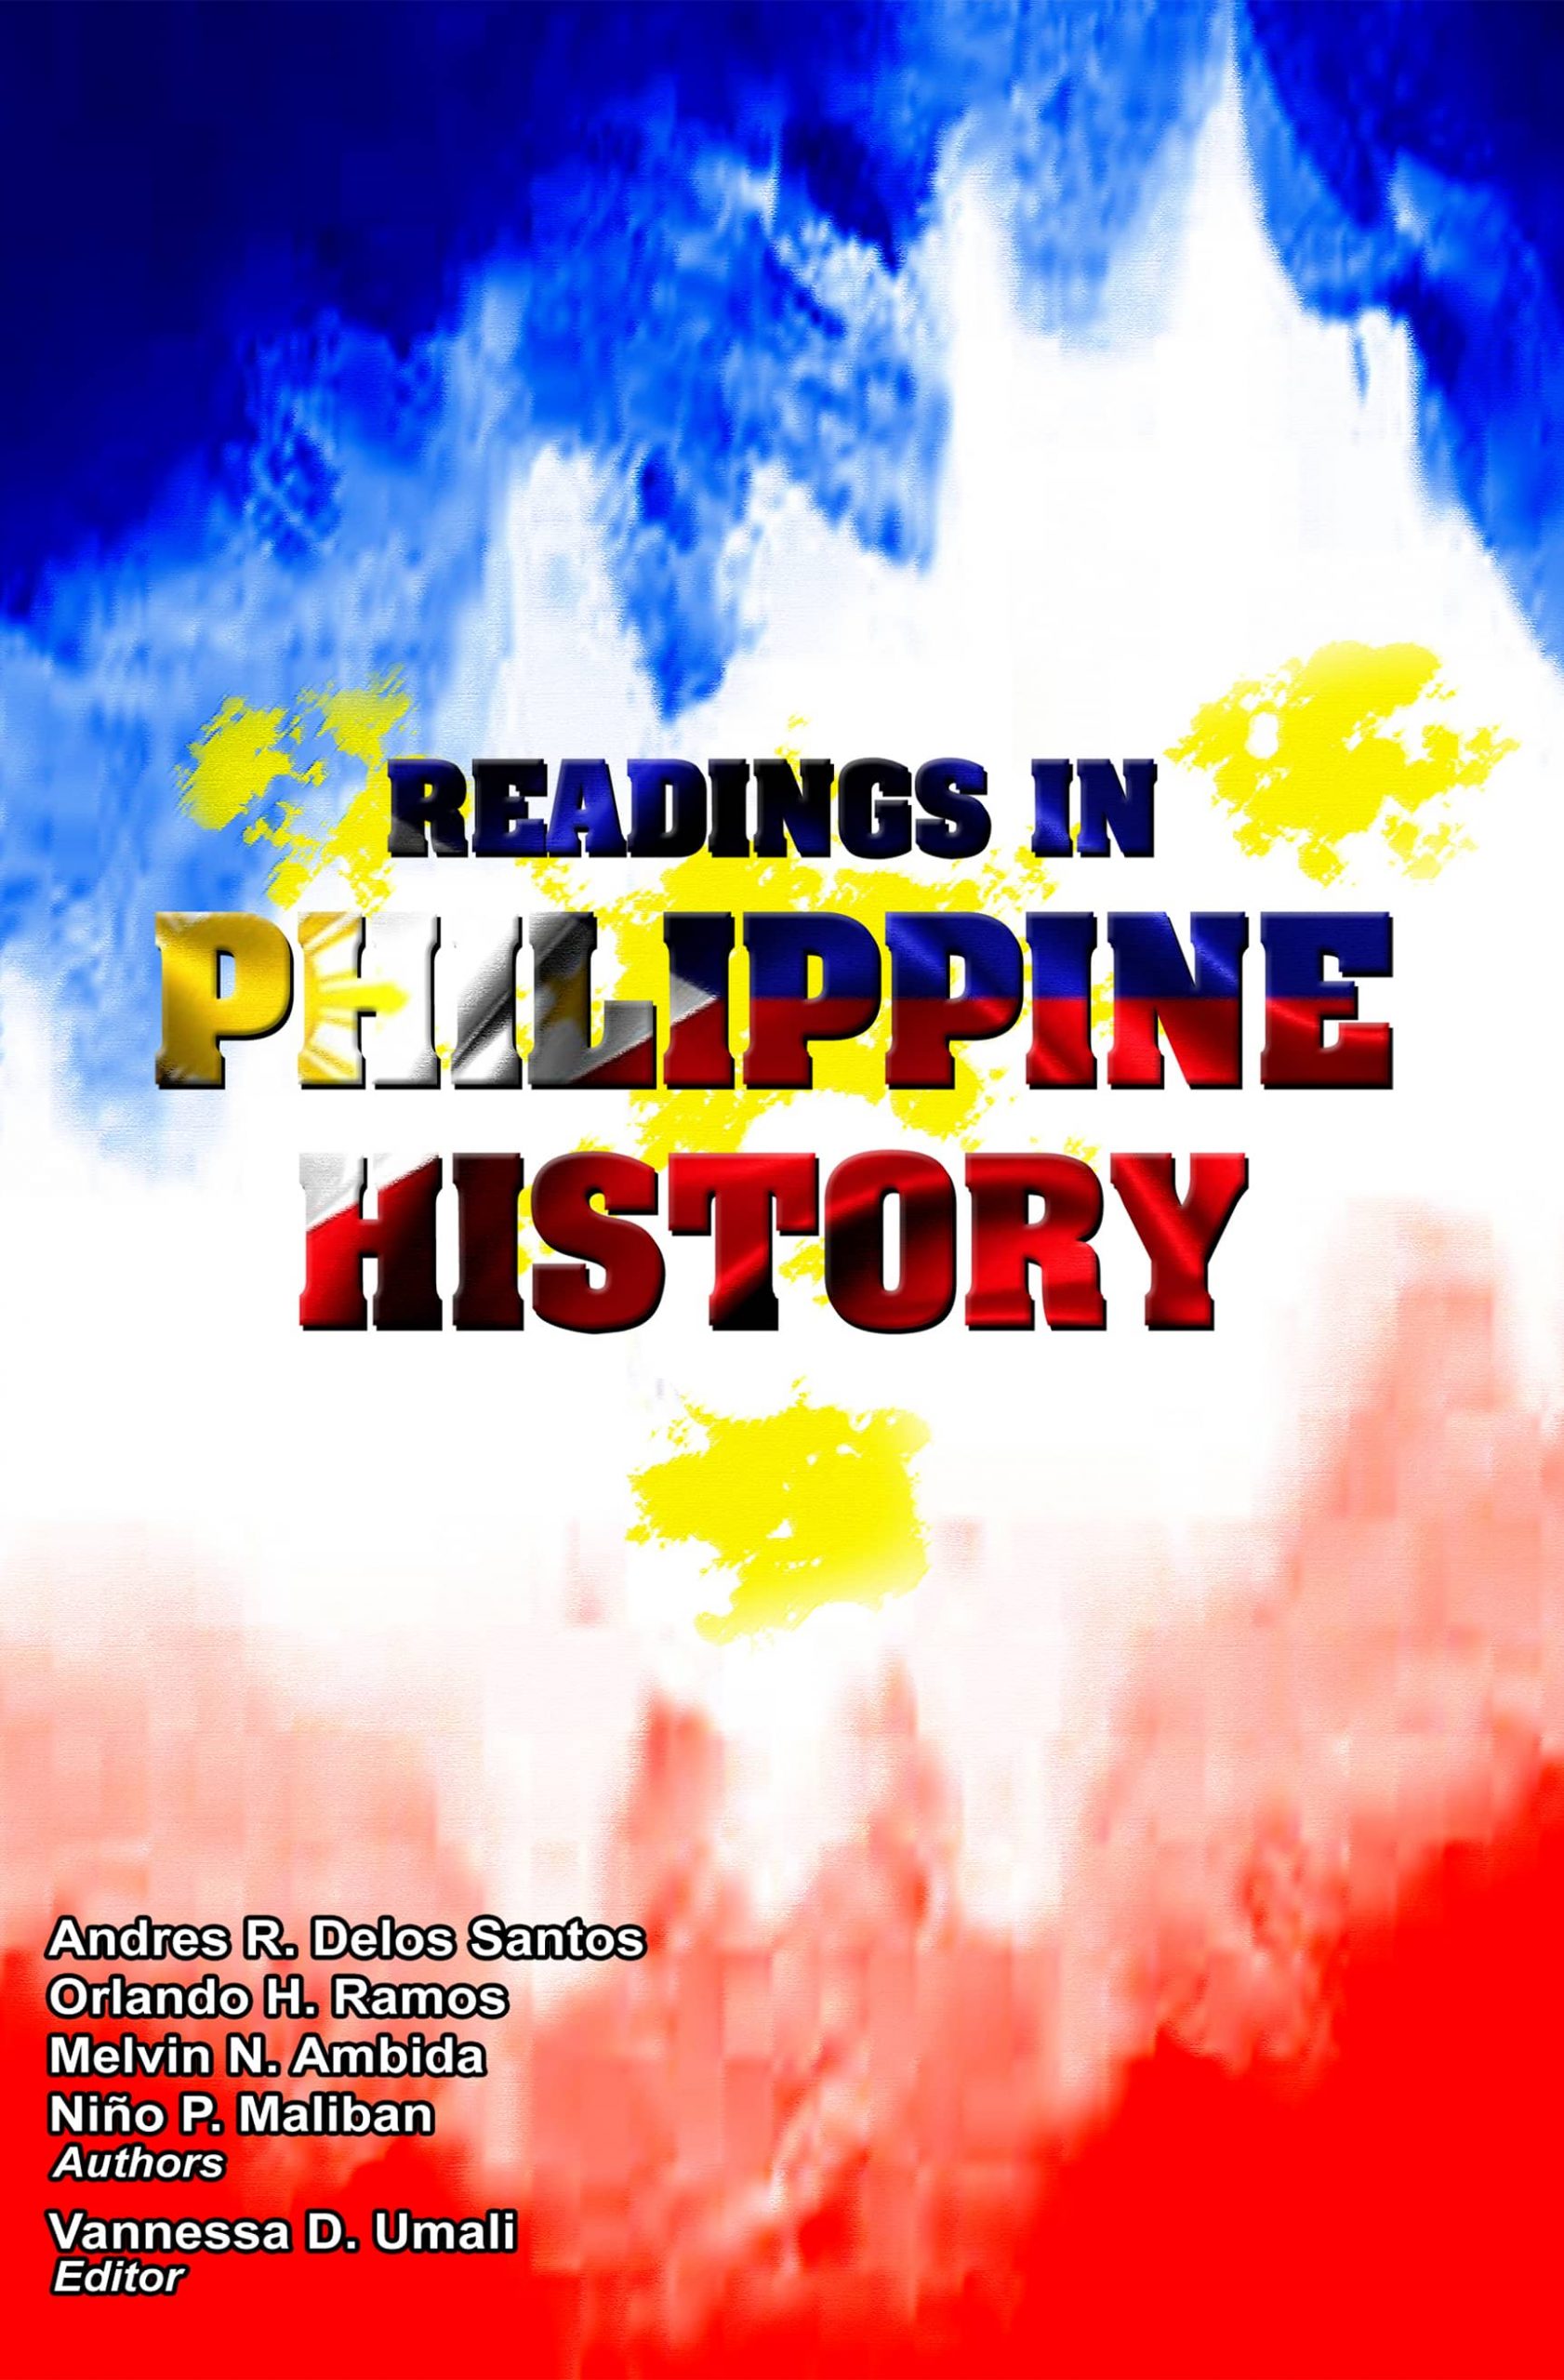 essay about reading in philippine history